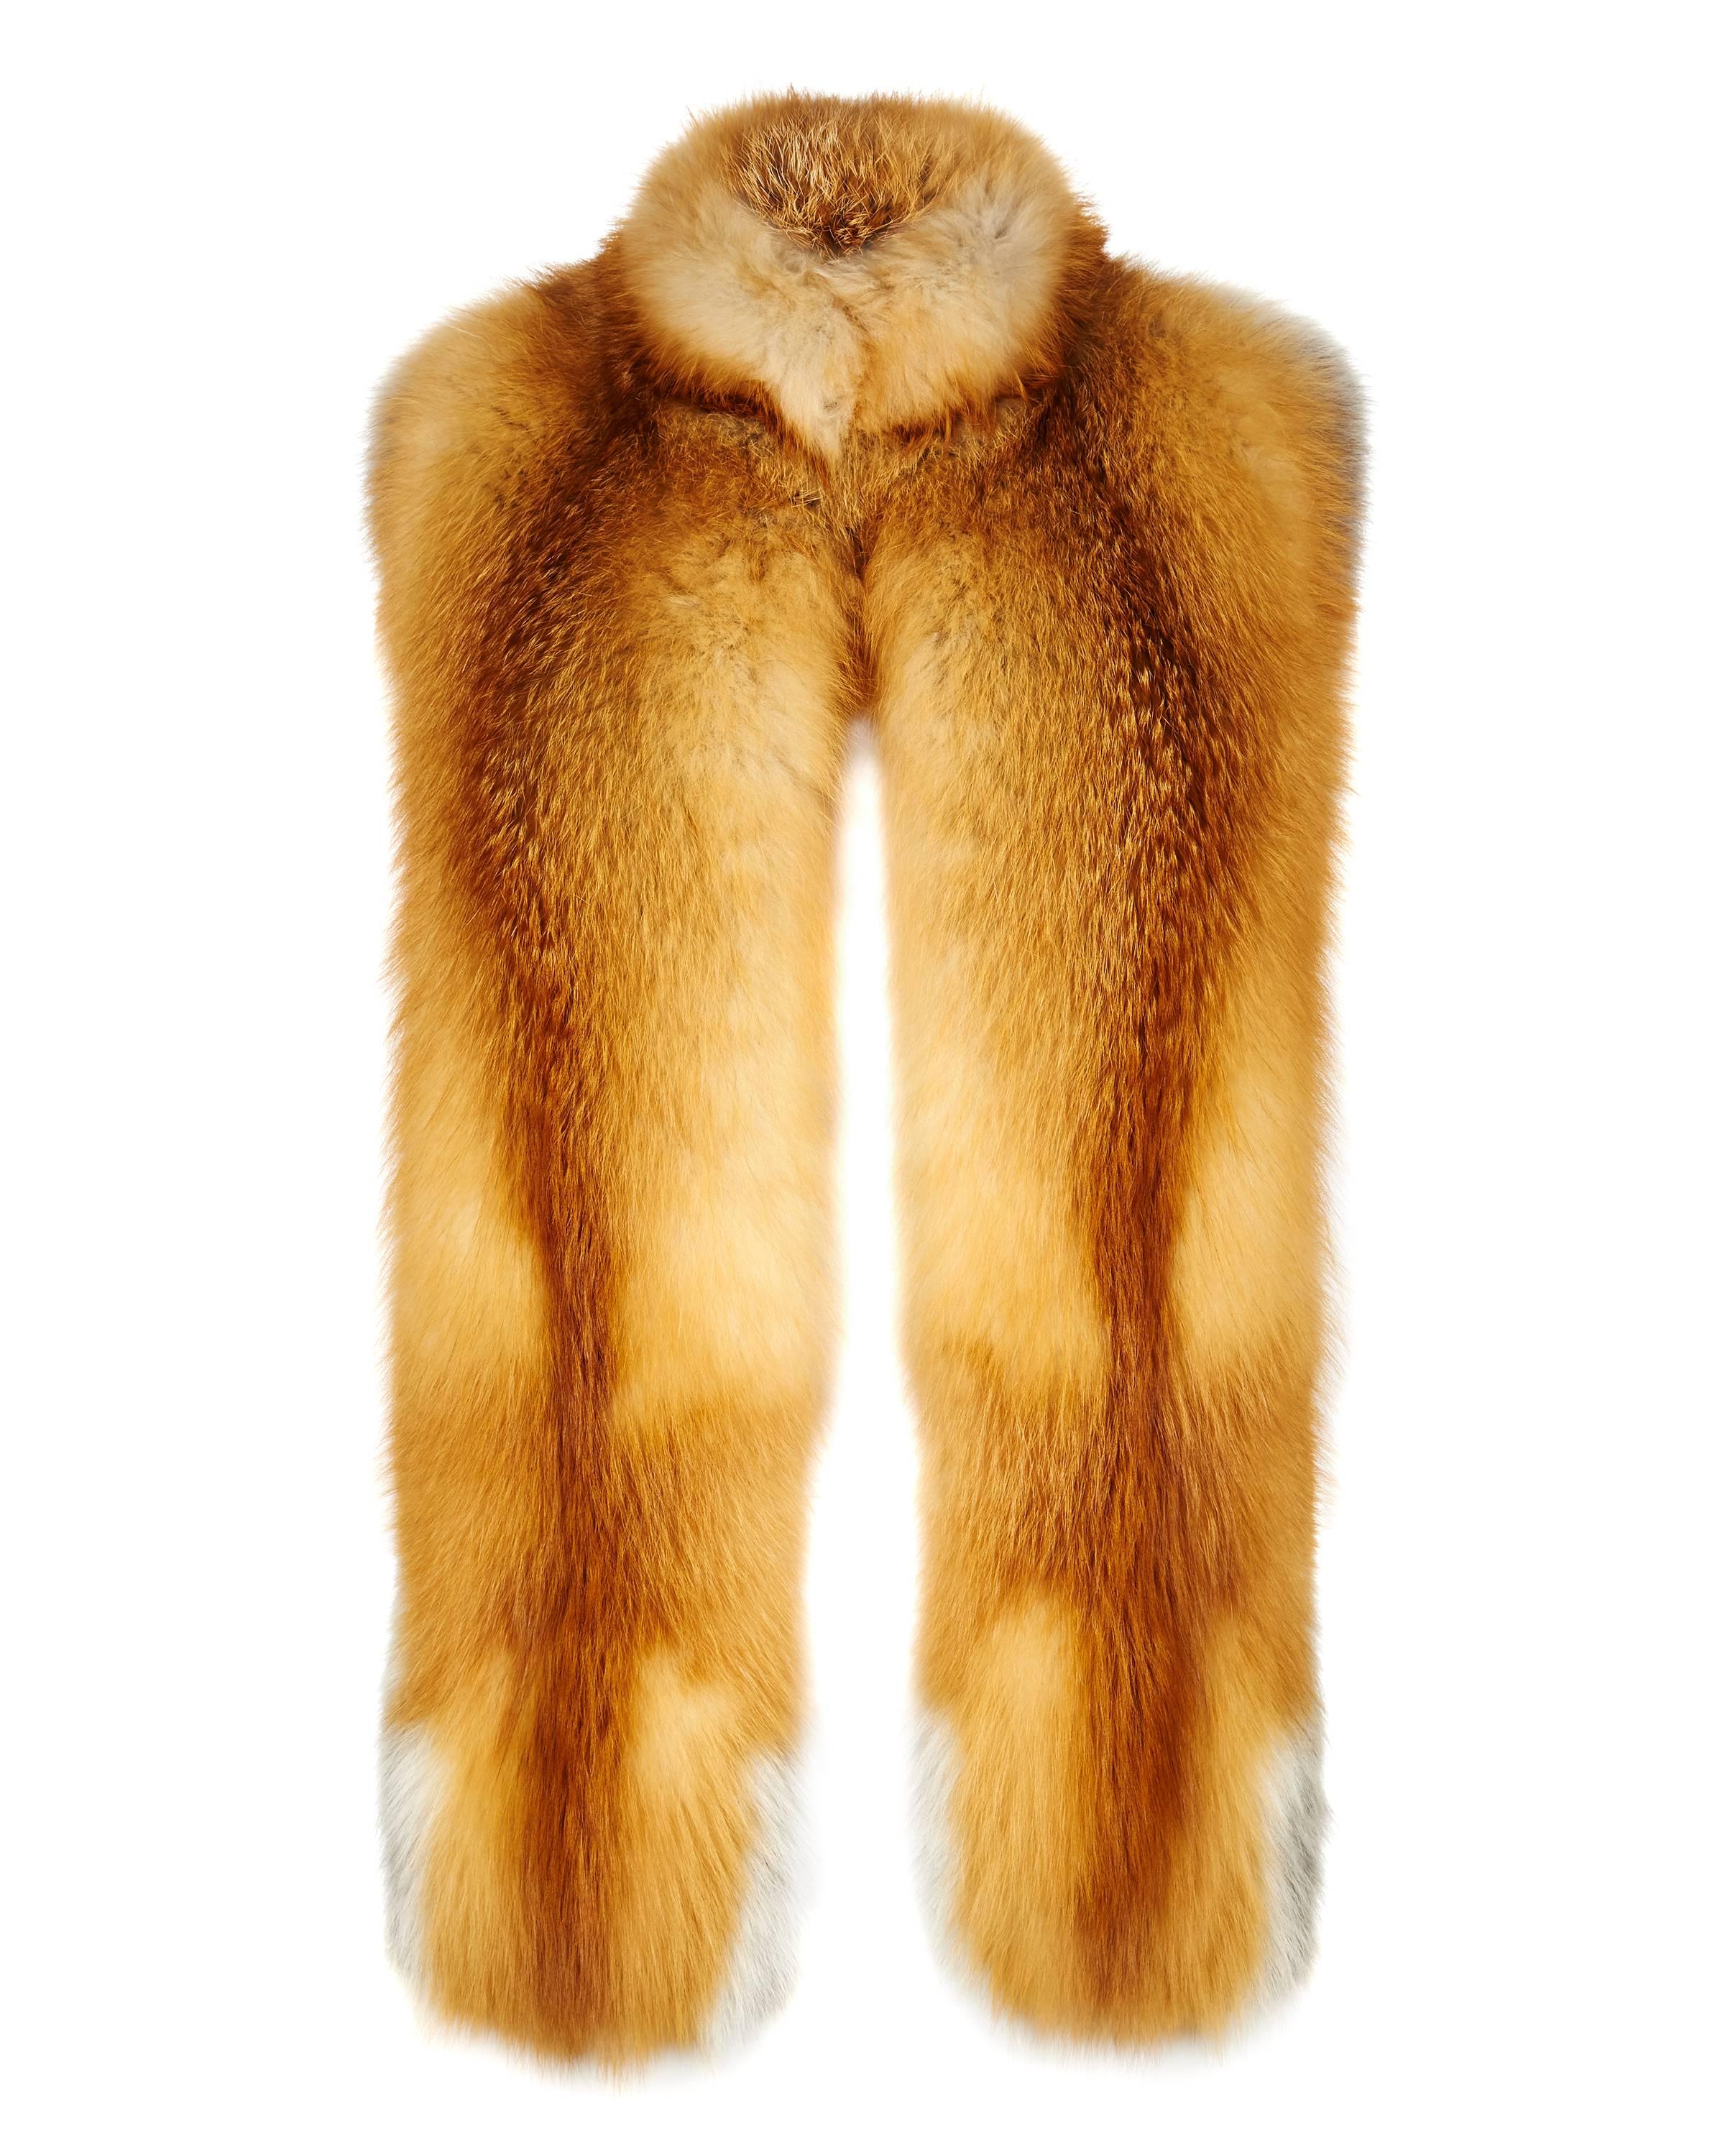 his Natural Collection is Verheyen London’s versatile collection for country or city wear, crafted in the finest and highest quality origin assured fur.  A structured design to wrap around you for country weekend getaways and for a statement look